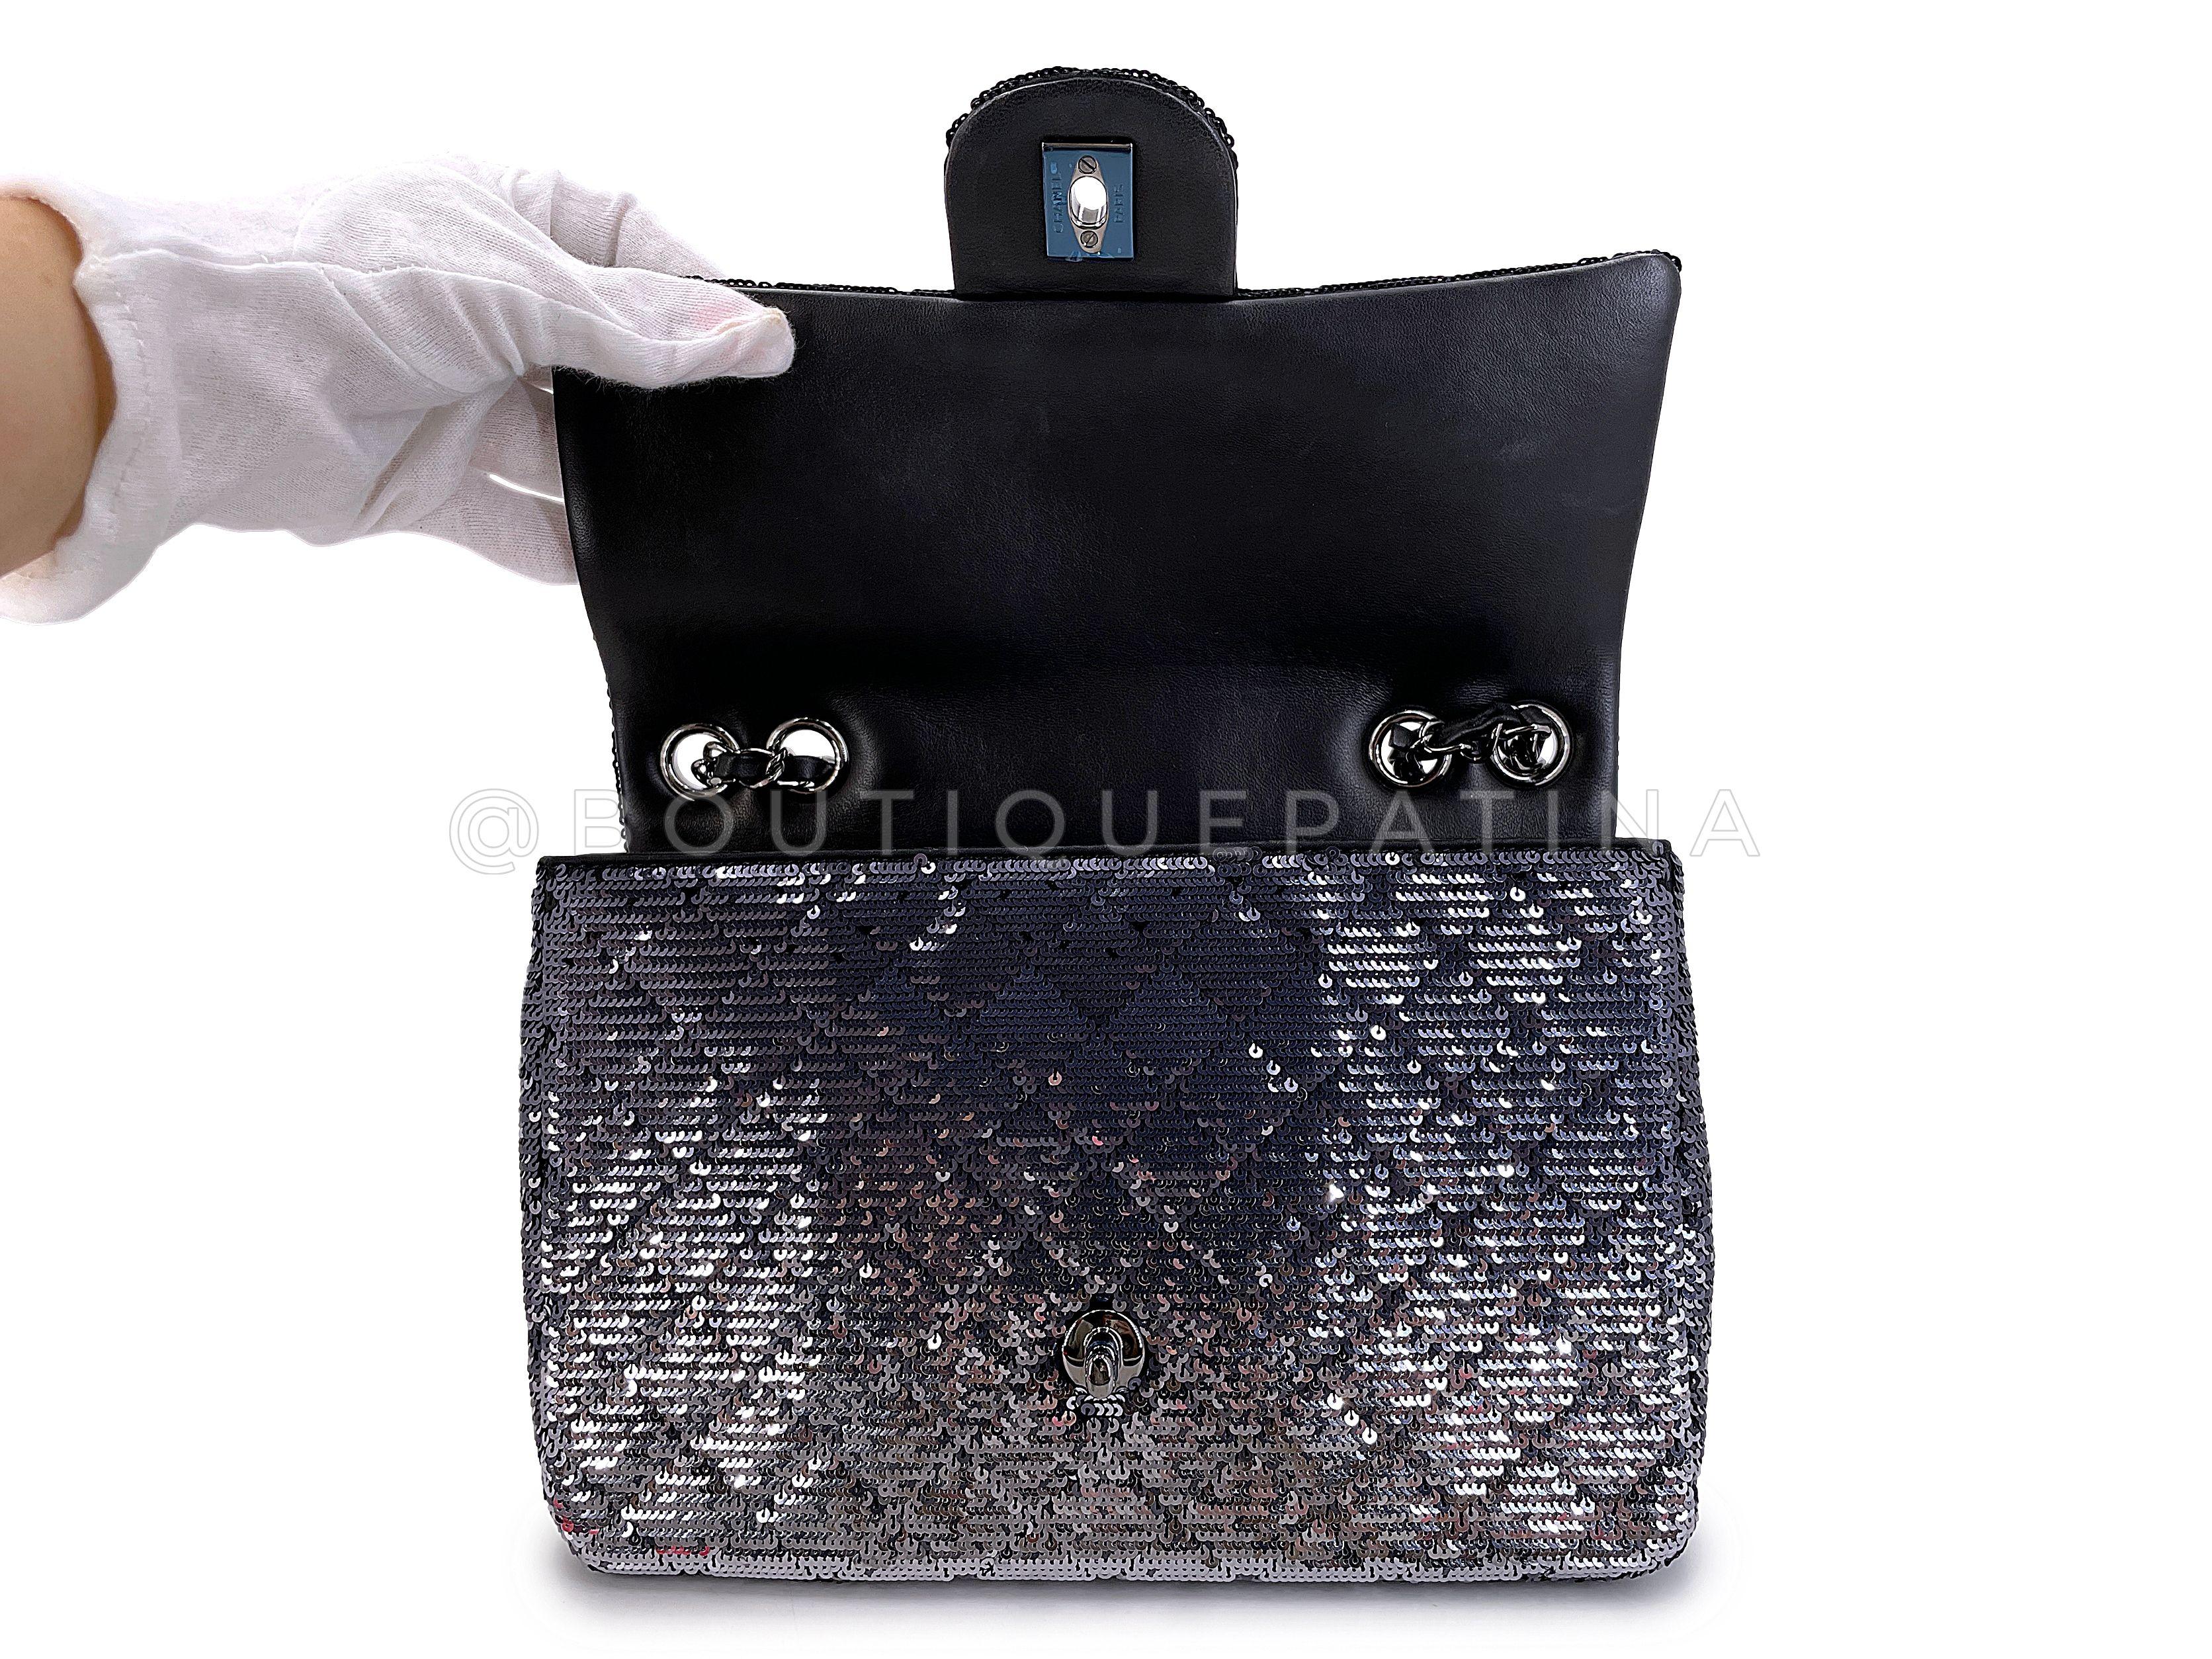 Chanel 2015 Black Silver Quilted Sequin Medium Classic Flap Bag 67572 For Sale 5